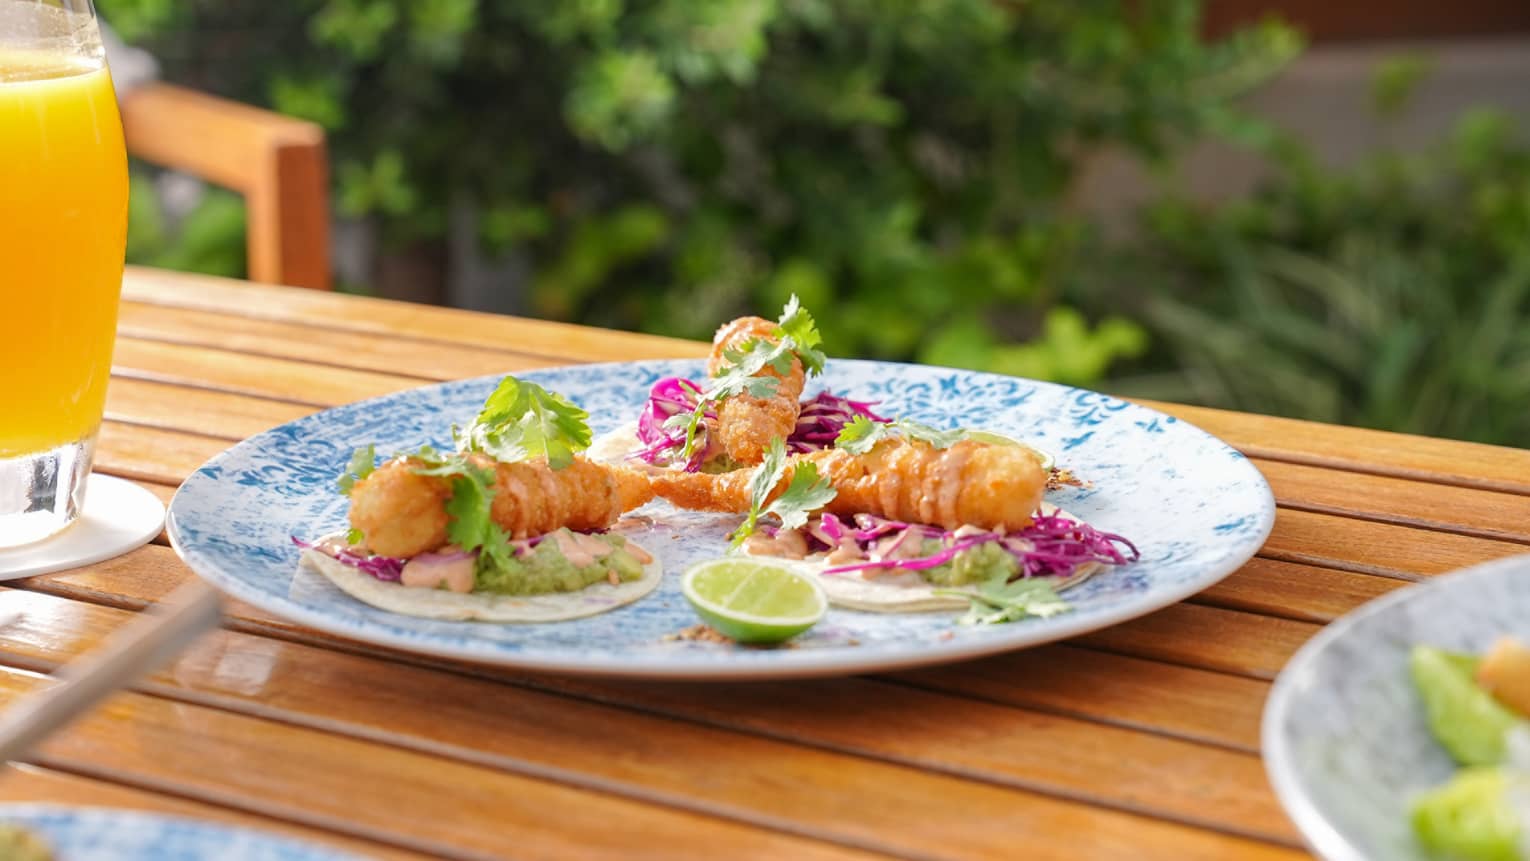 Prawn tacos on a plate.